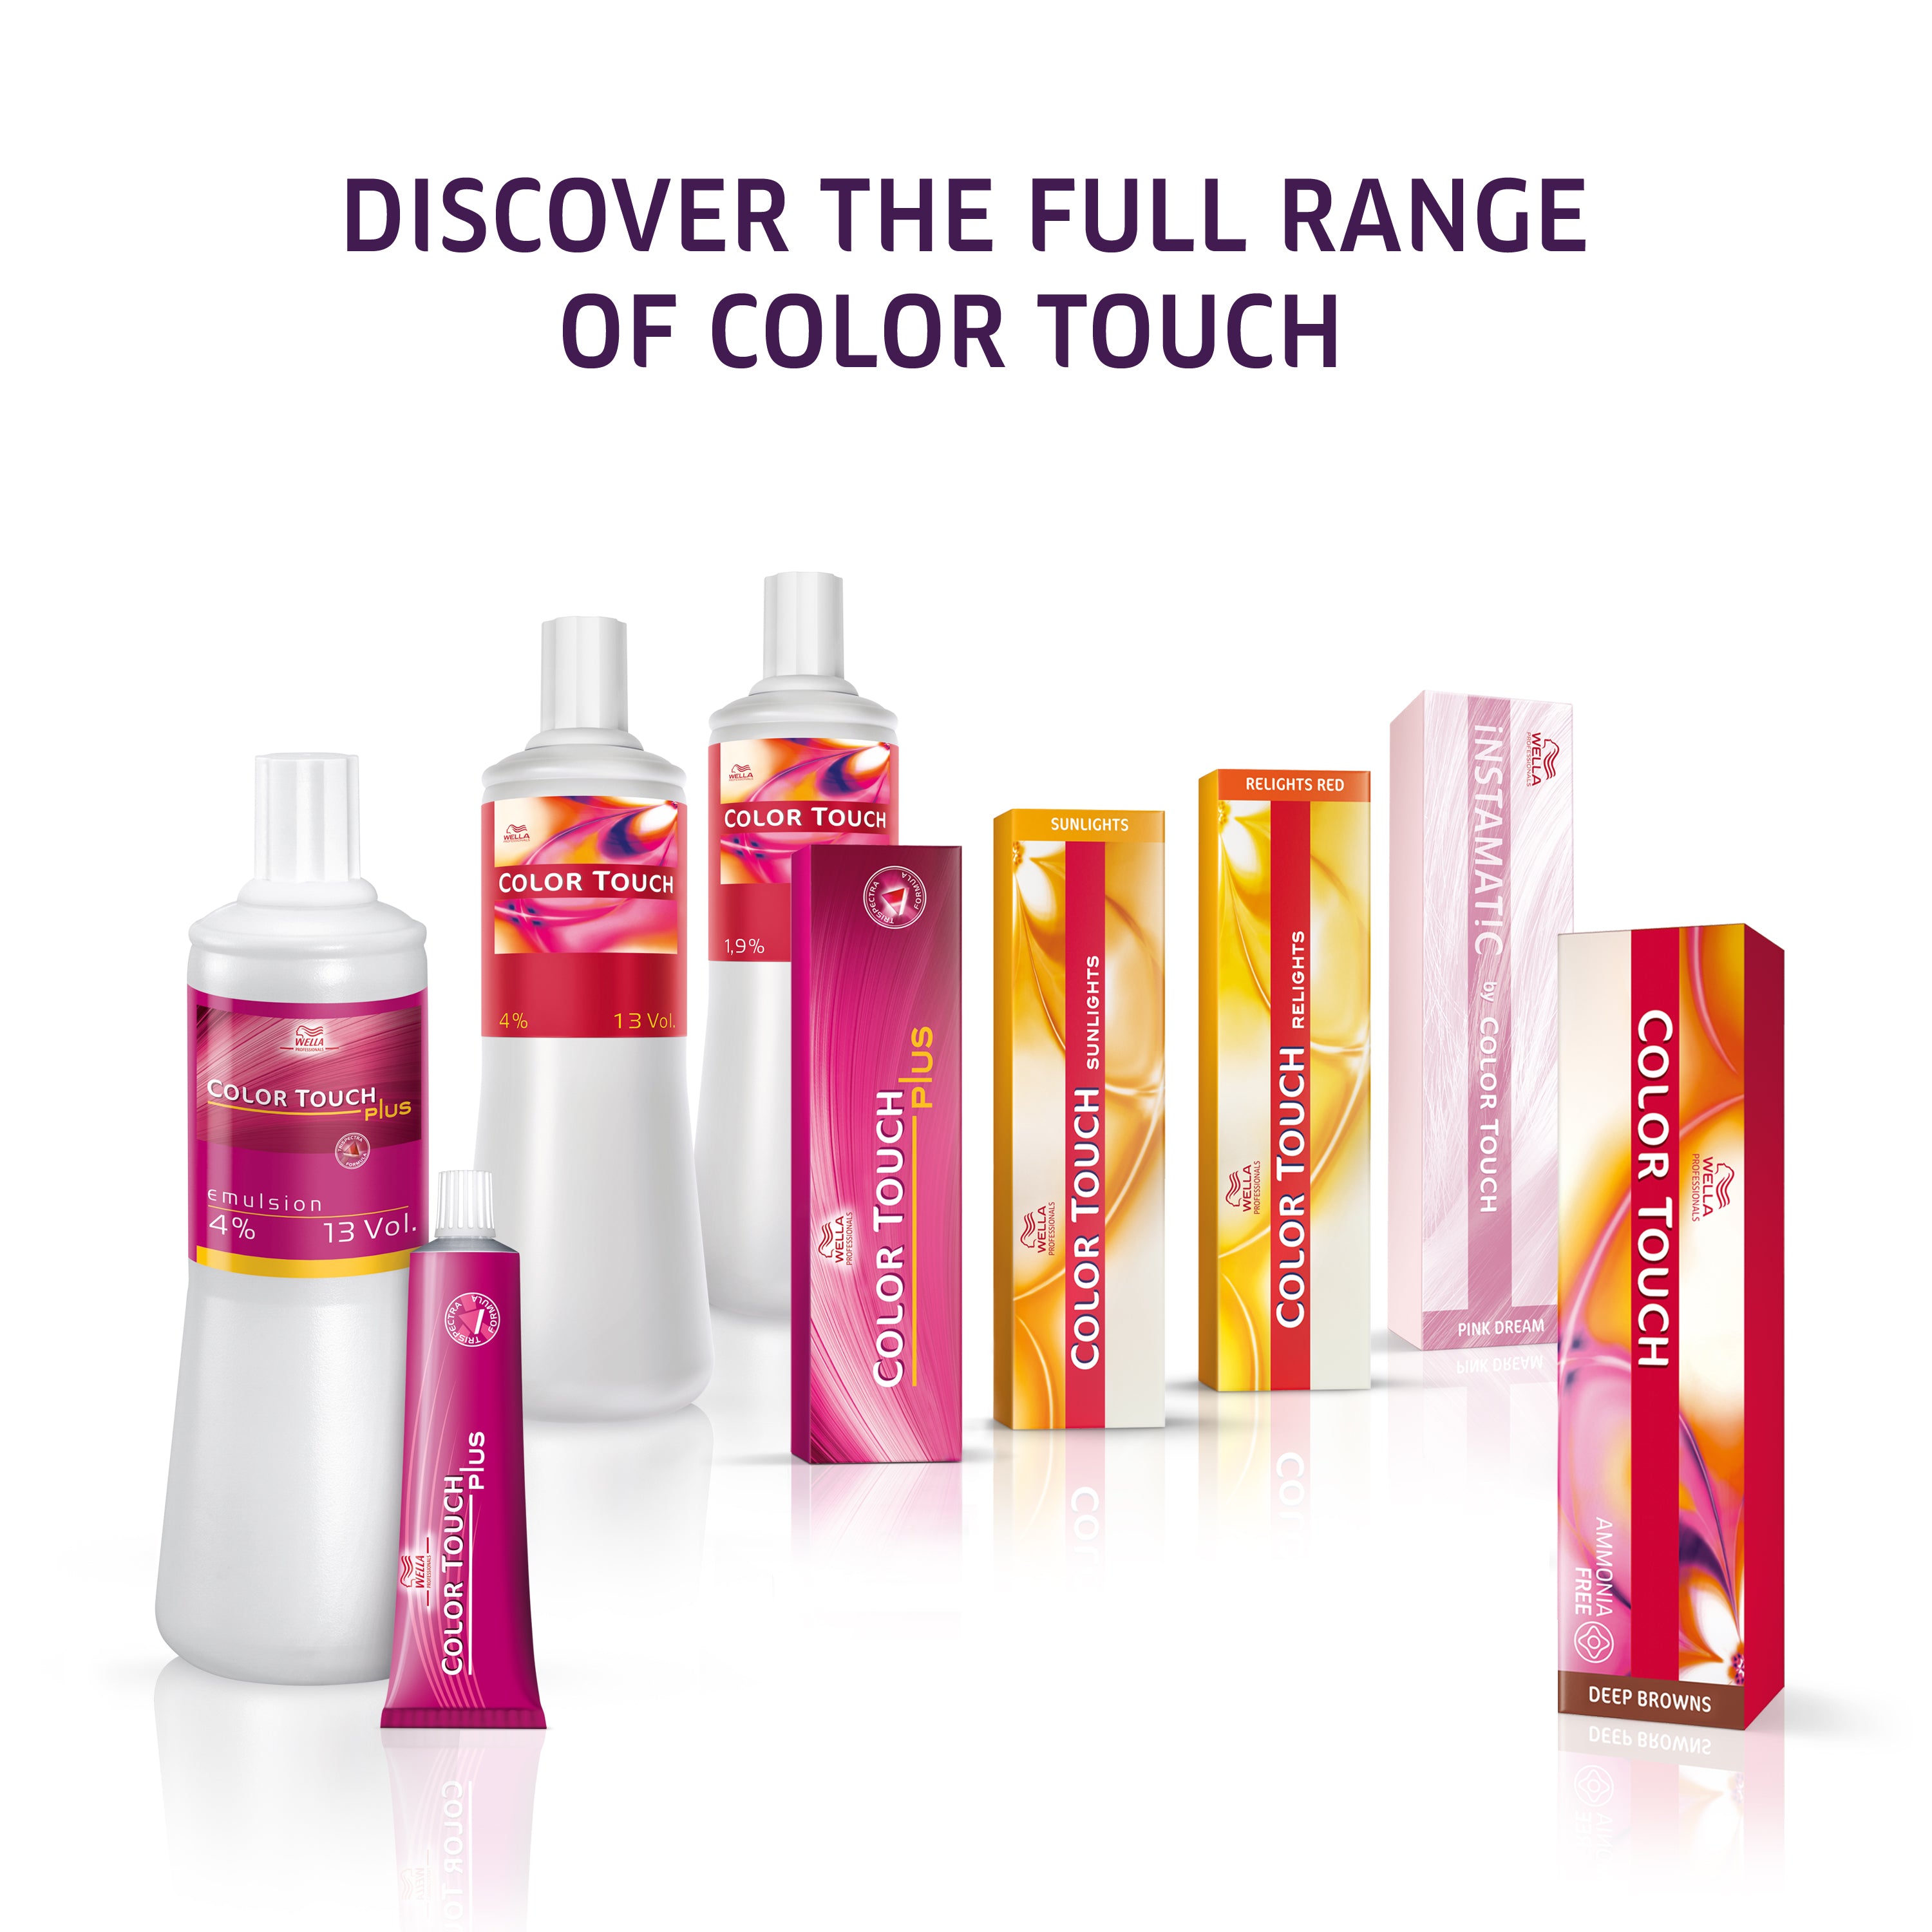 Wella Professional Color Touch Plus 55/03